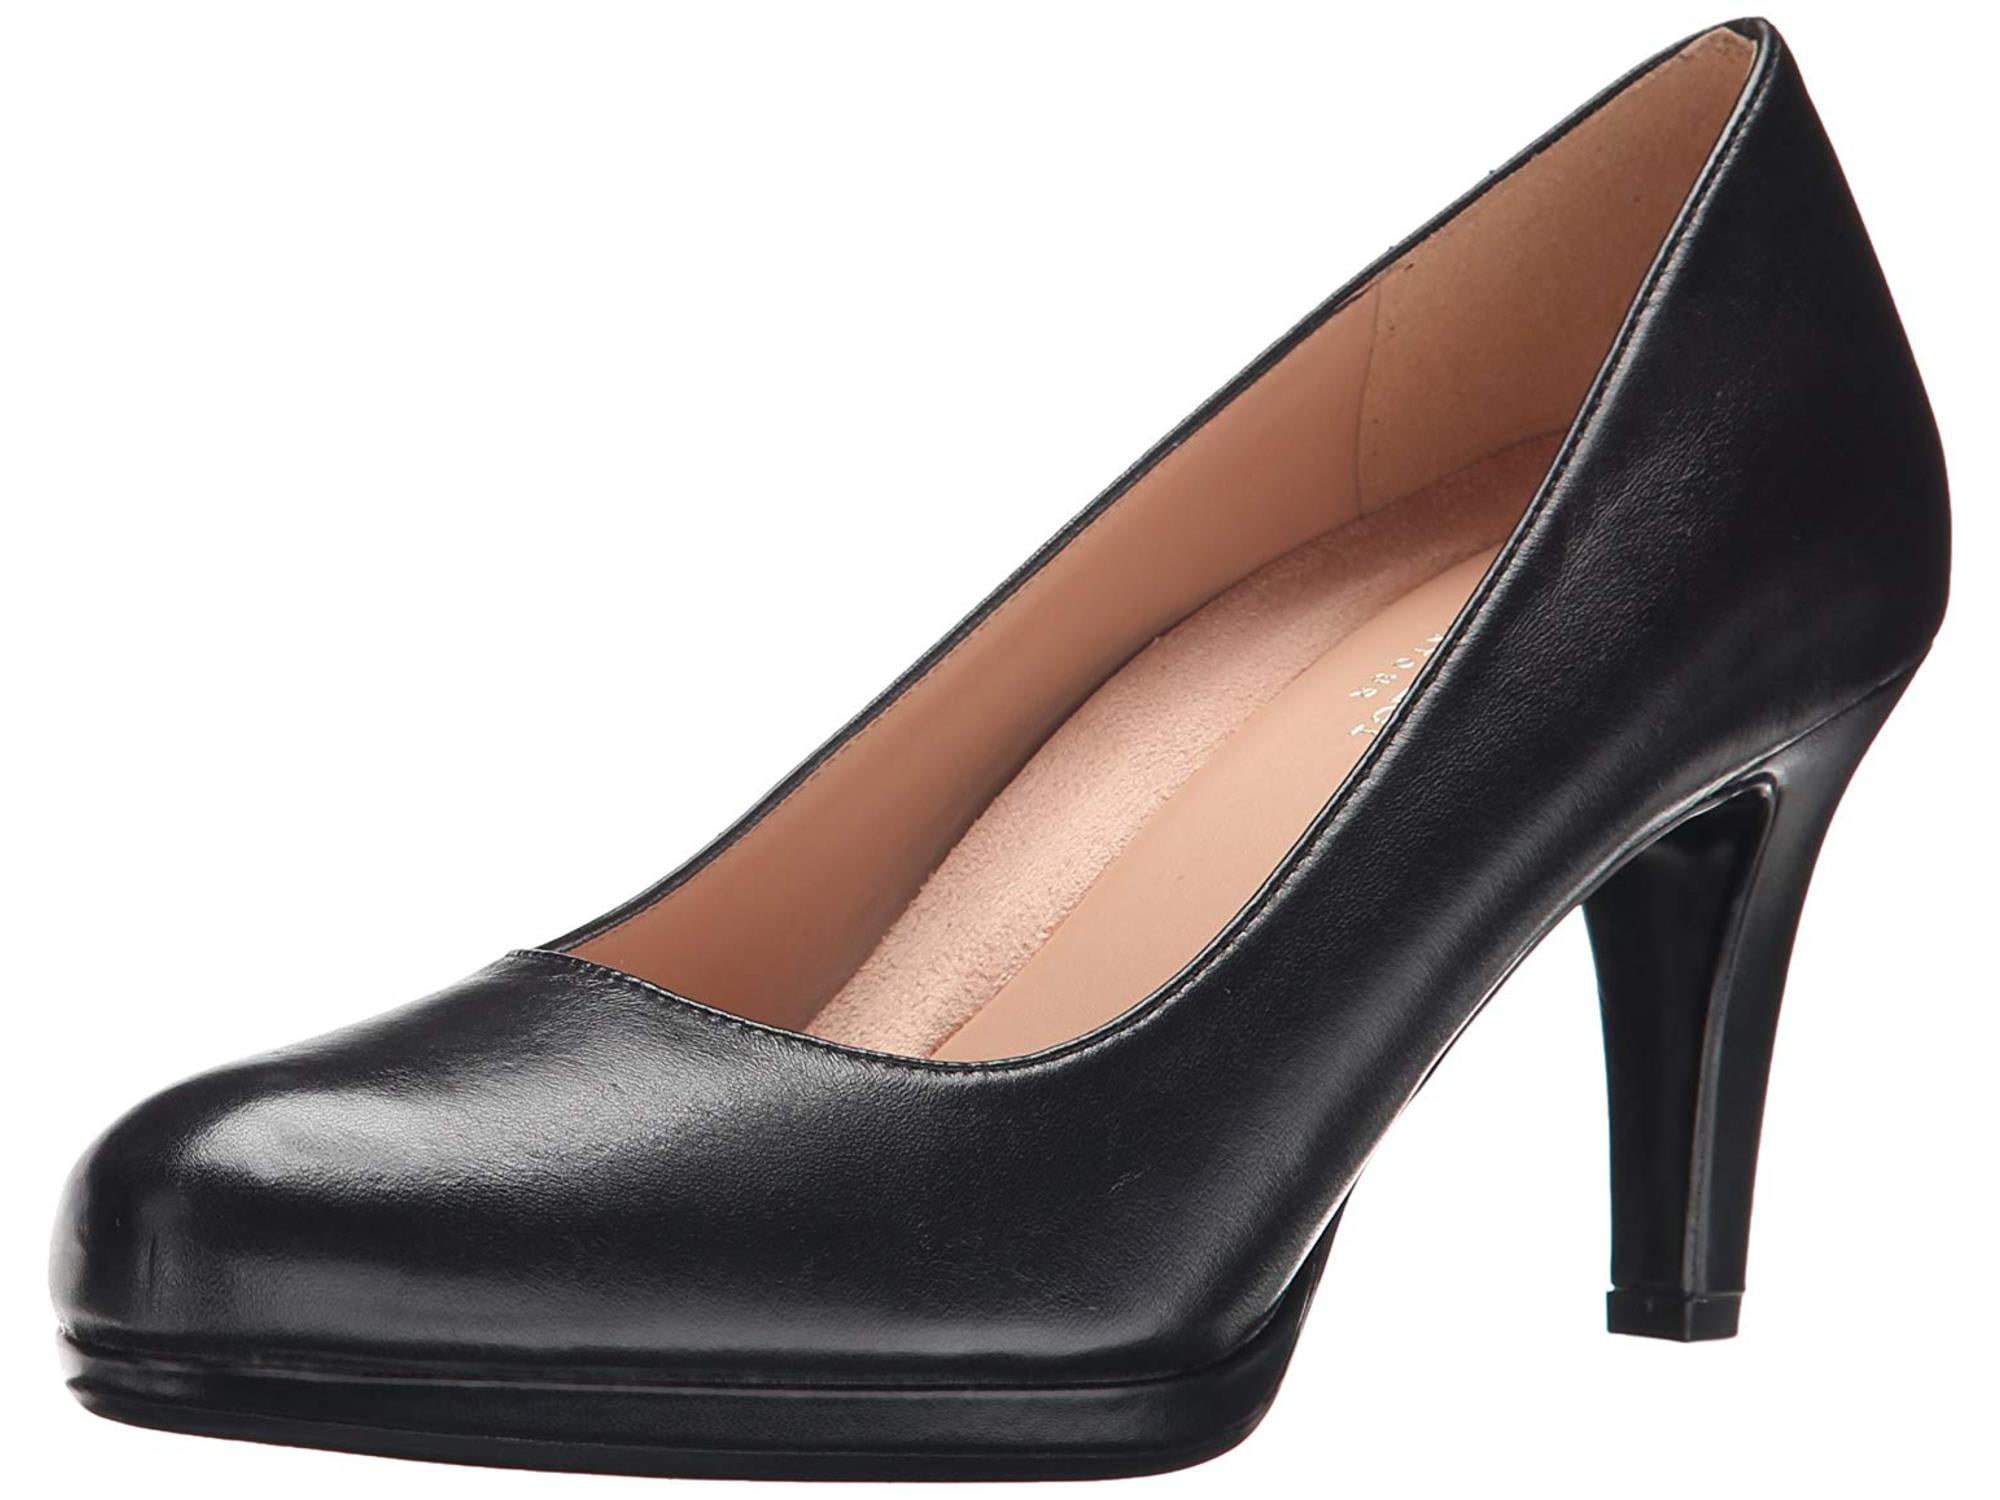 Naturalizer Womens Michelle Leather Round Toe Classic Pumps, Black